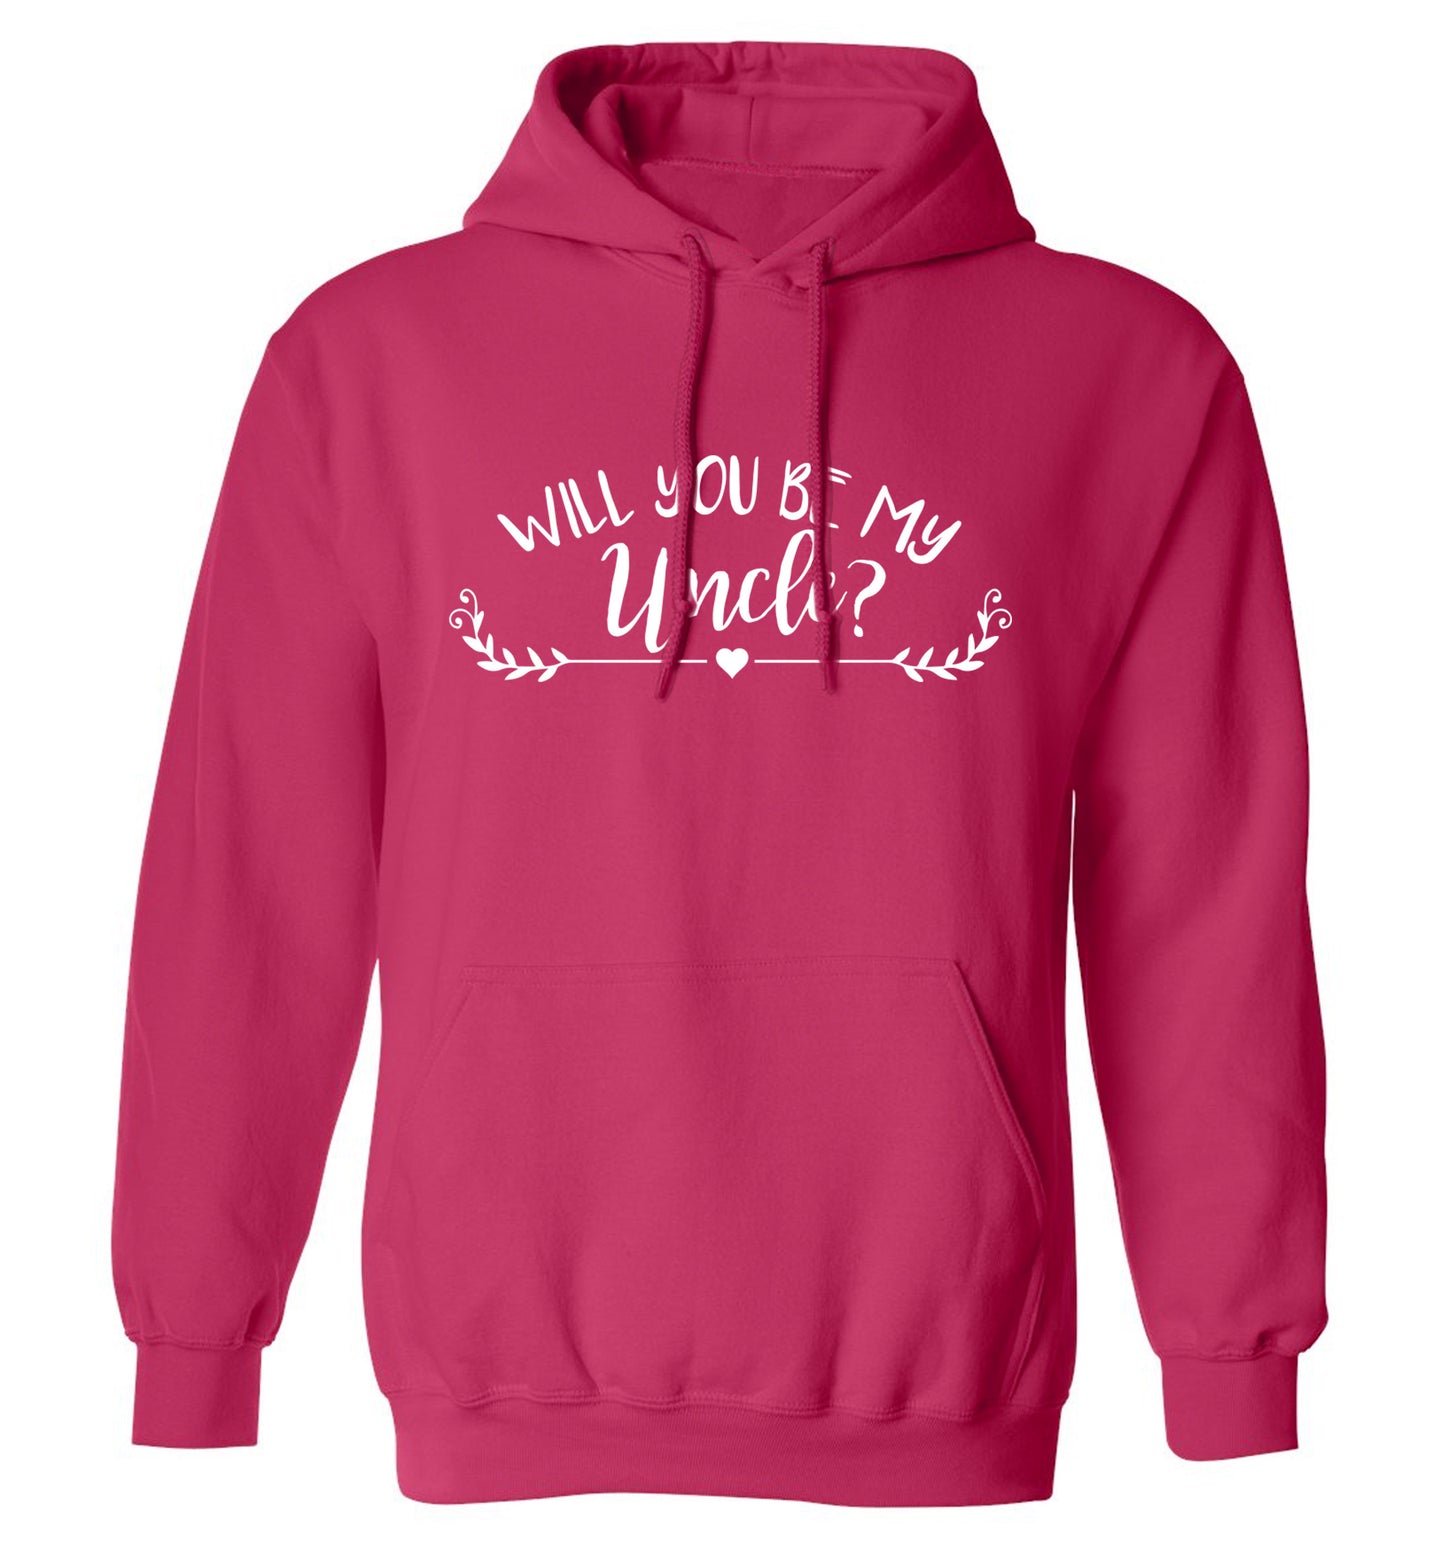 Will you be my uncle? adults unisex pink hoodie 2XL